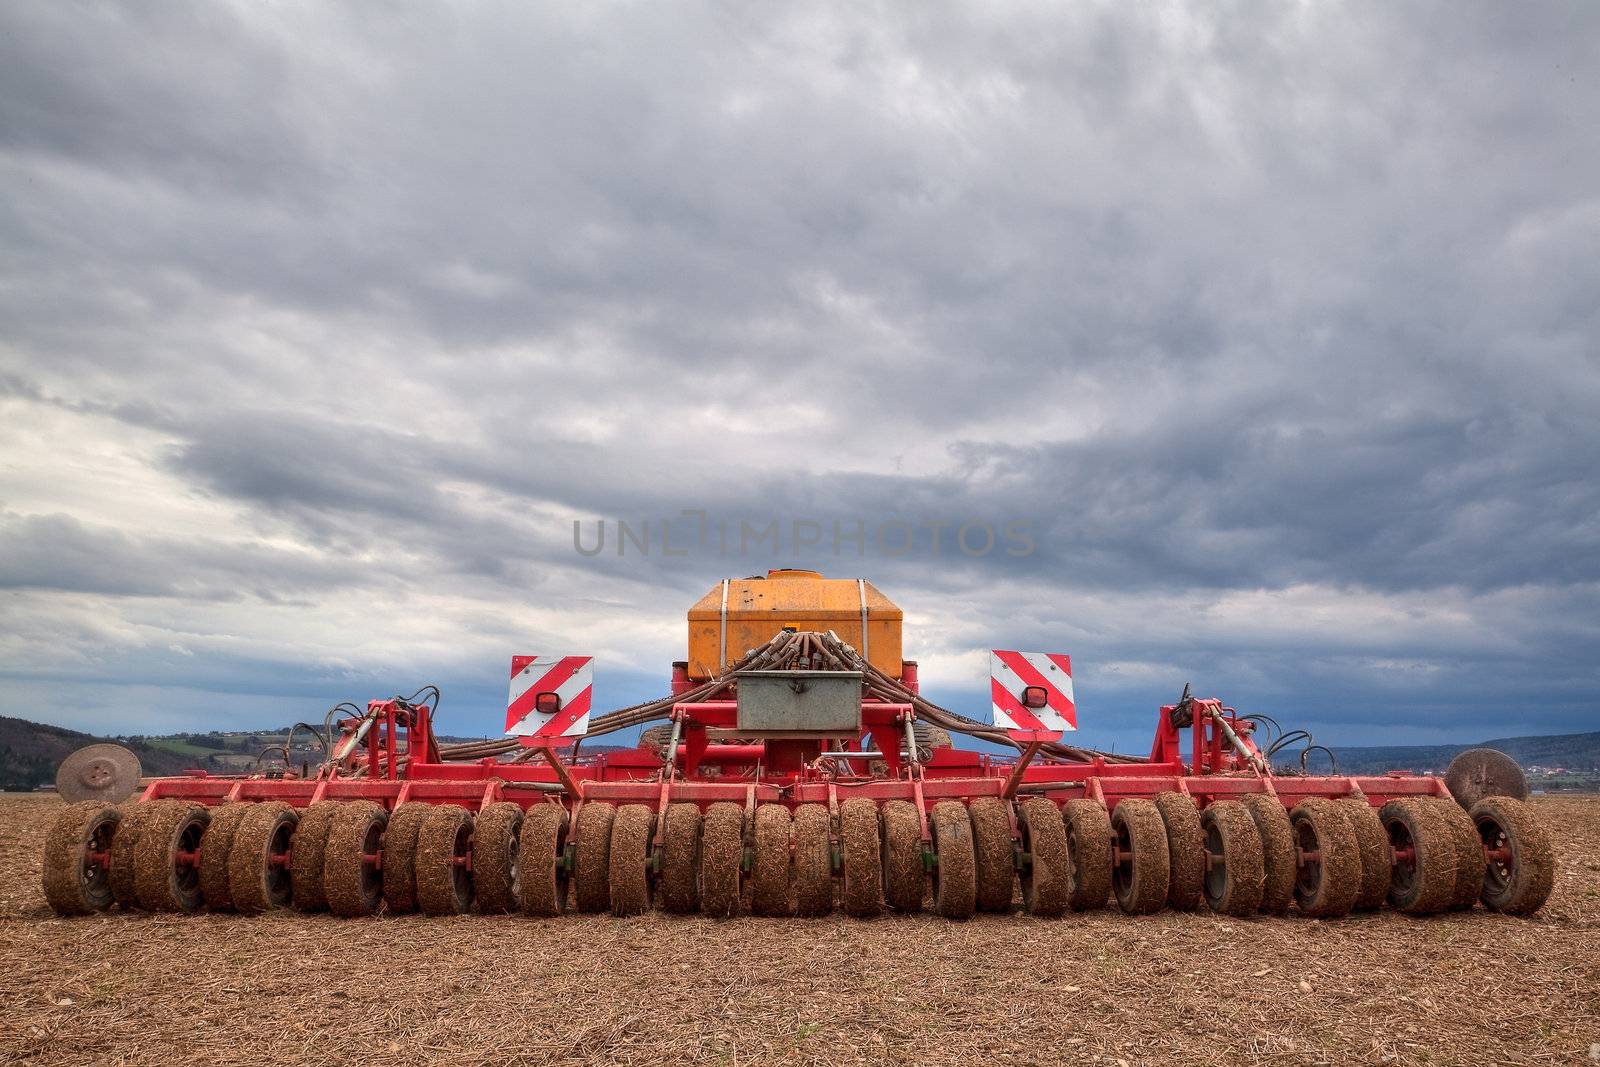 Machinery sitting after storm in a wheat field